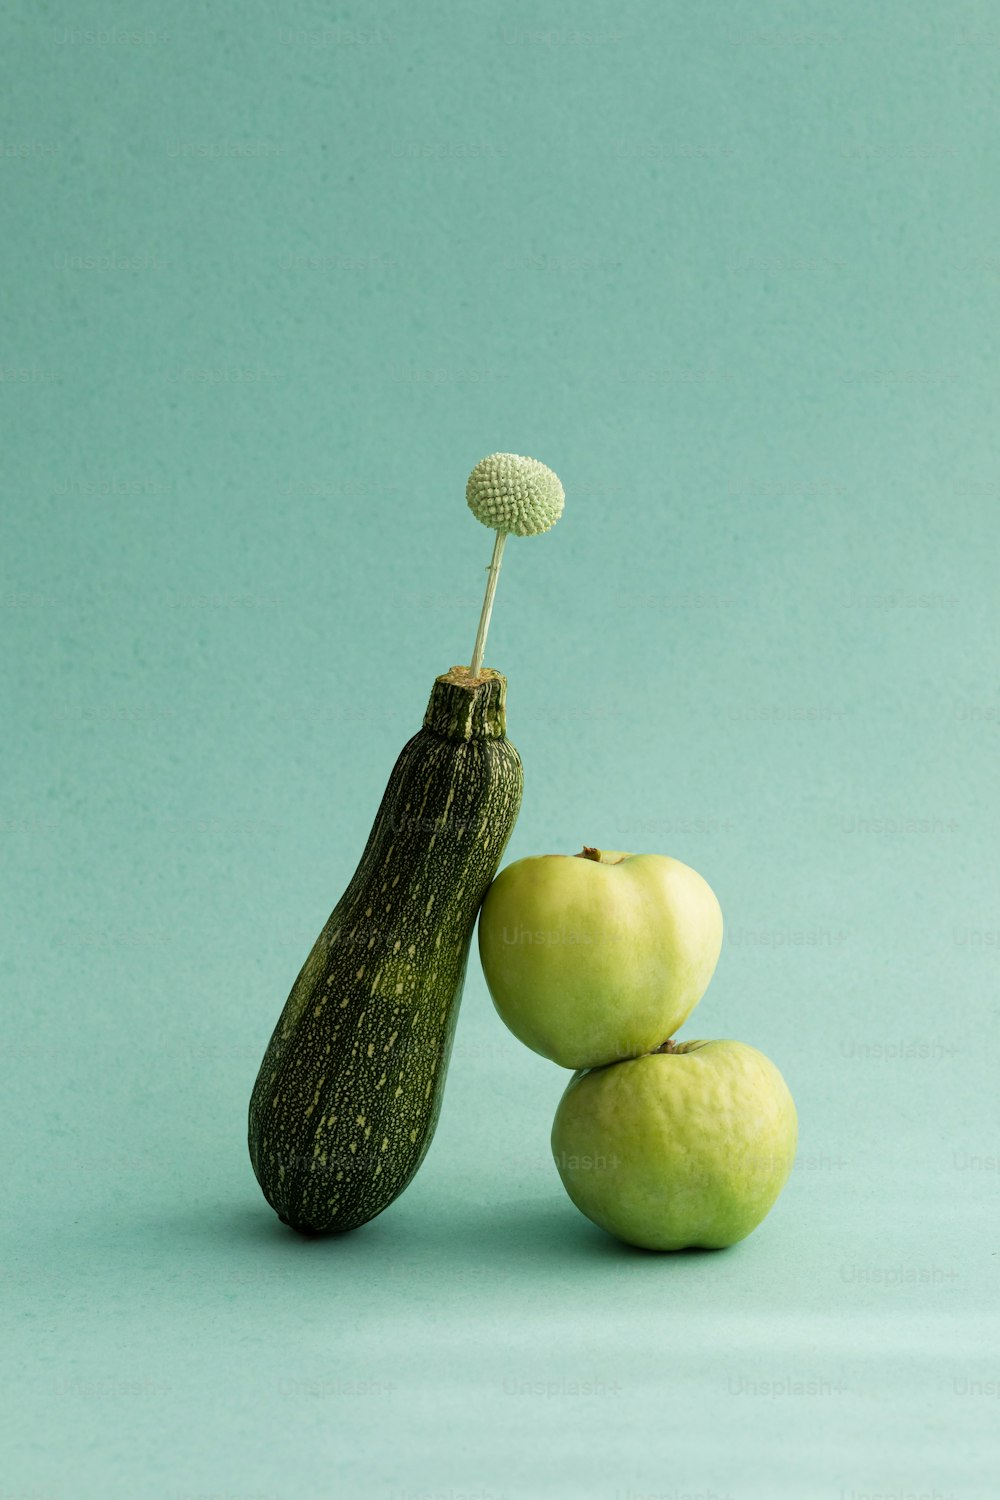 a cucumber and two green apples on a blue background